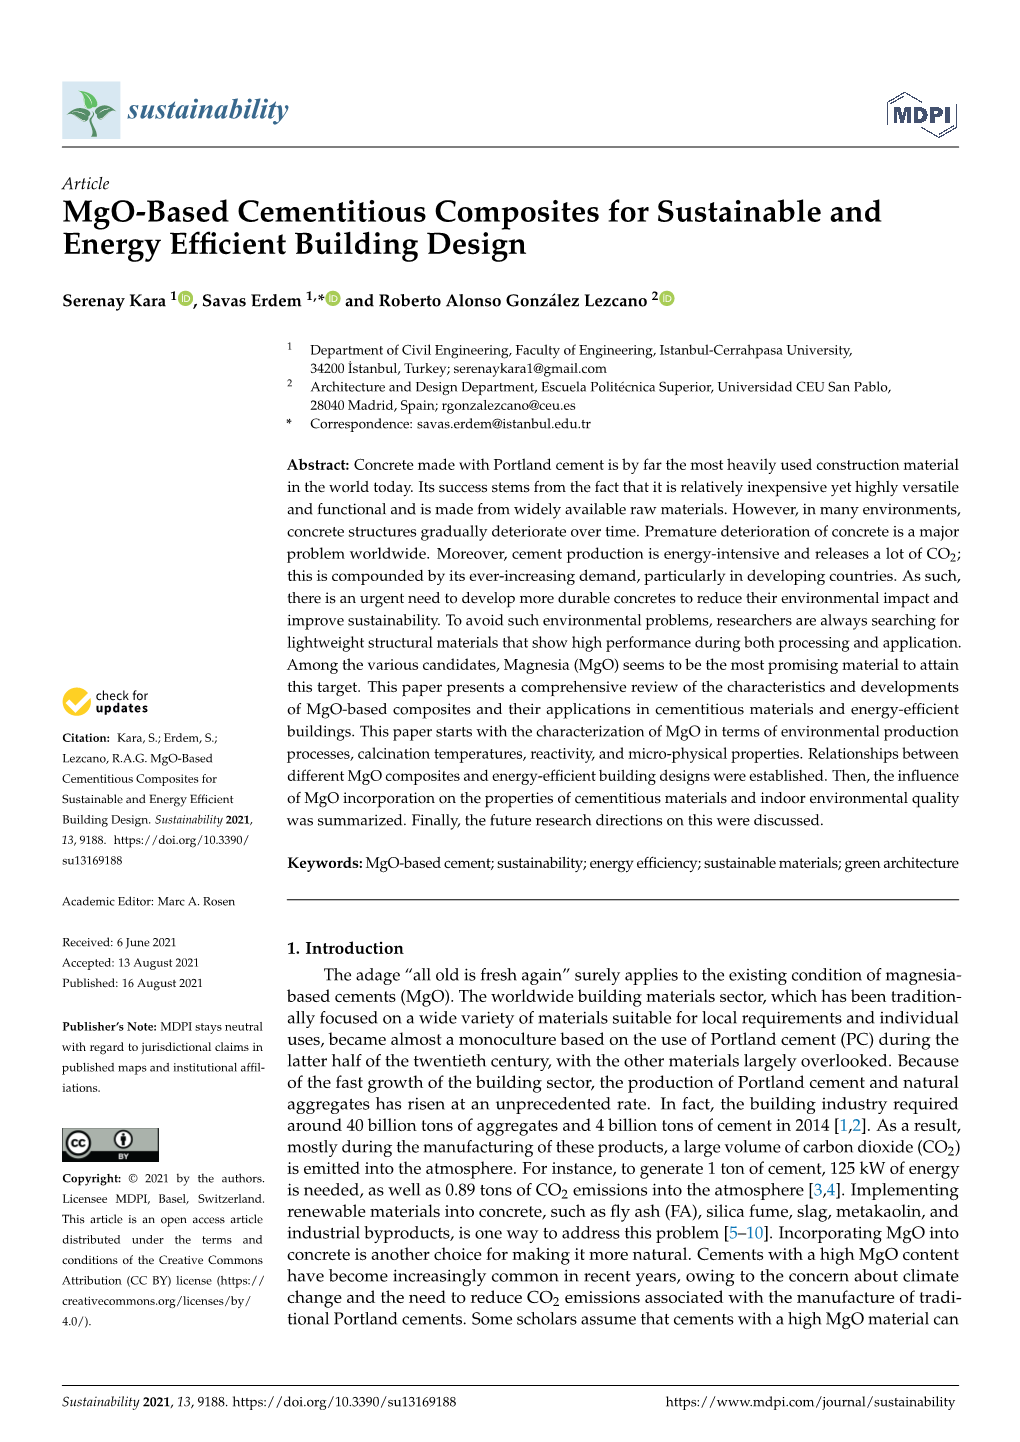 Mgo-Based Cementitious Composites for Sustainable and Energy Efﬁcient Building Design